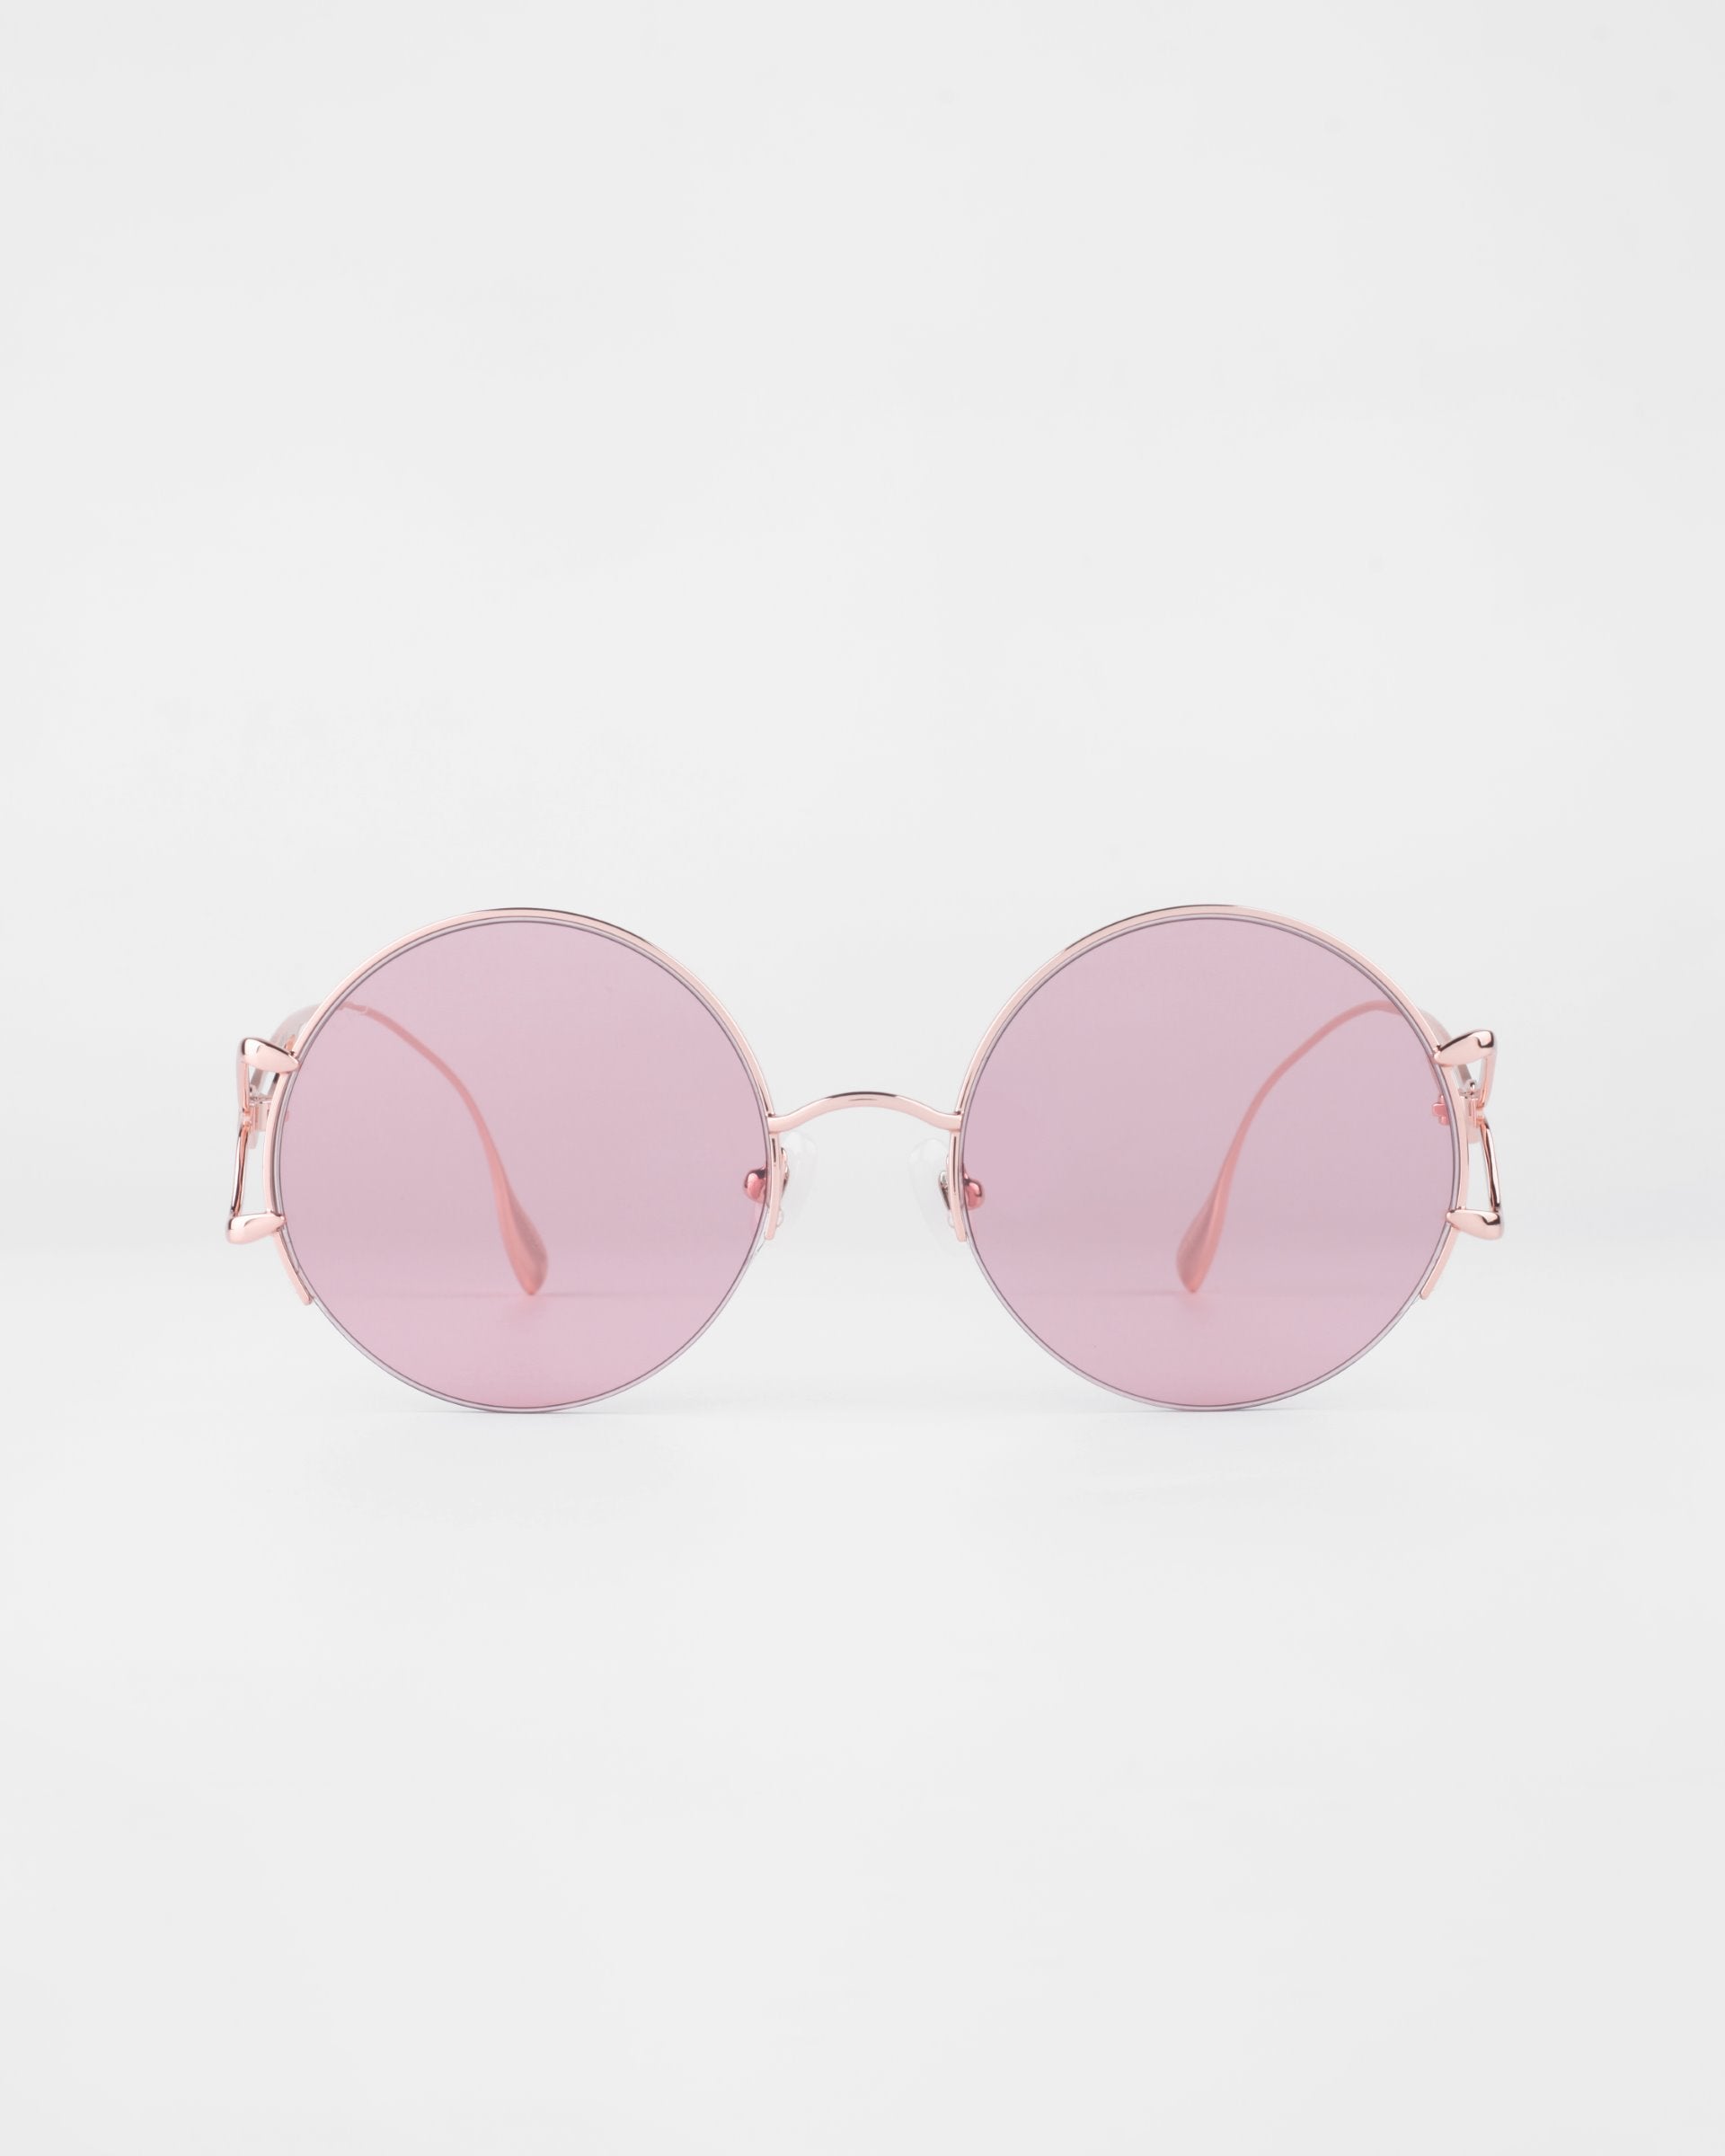 Diptych Sunglasses in Pink. Front View. 